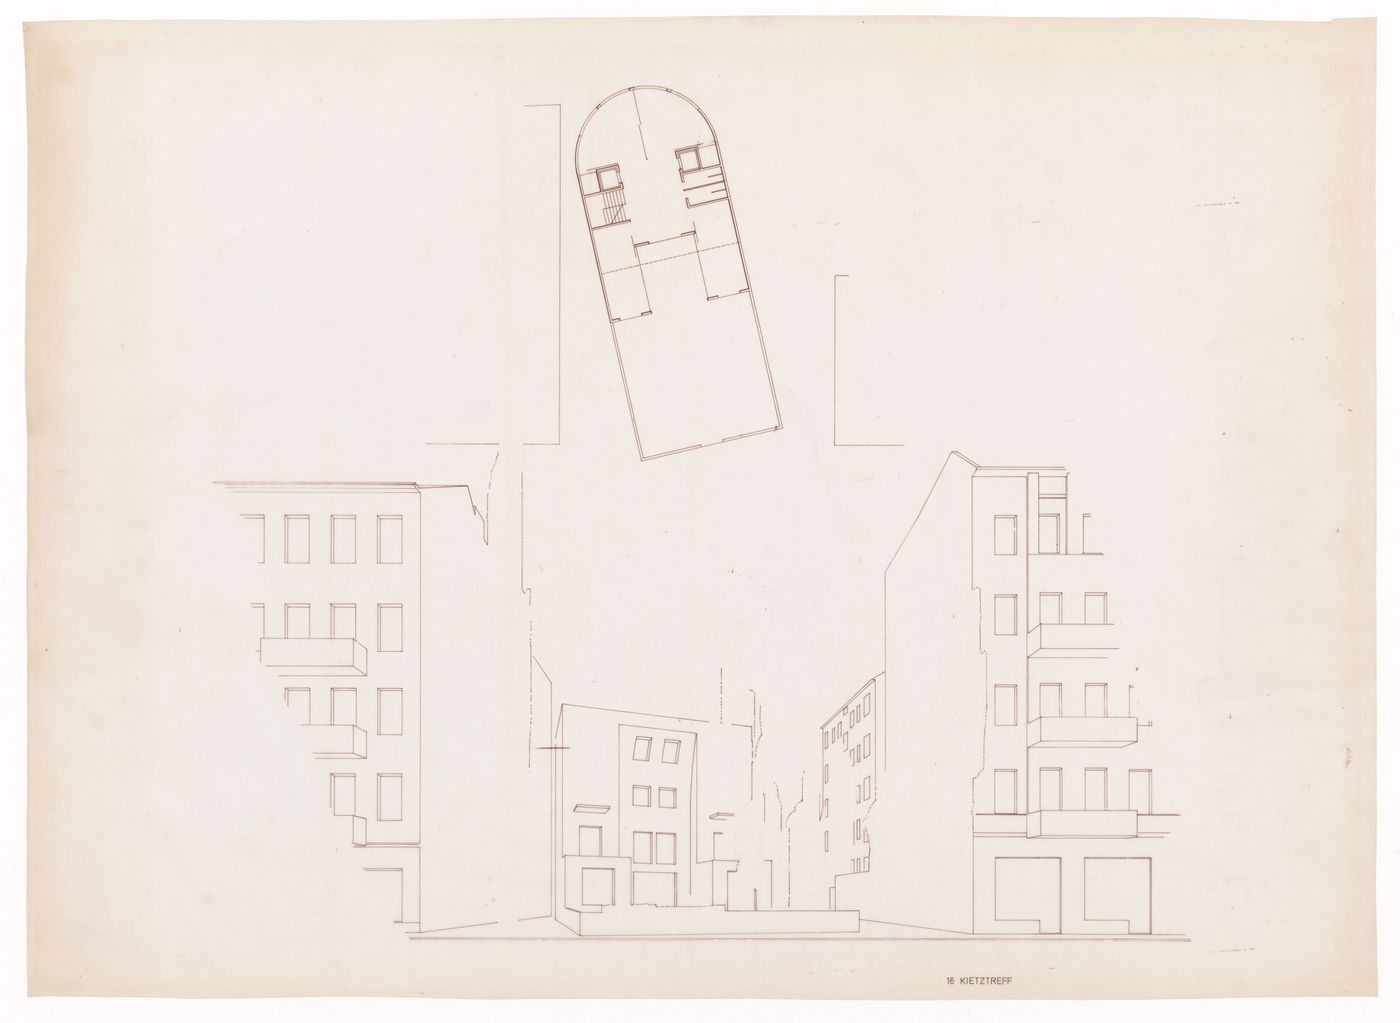 Plan and perspective for Block 121, Schlesisches Tor, Berlin